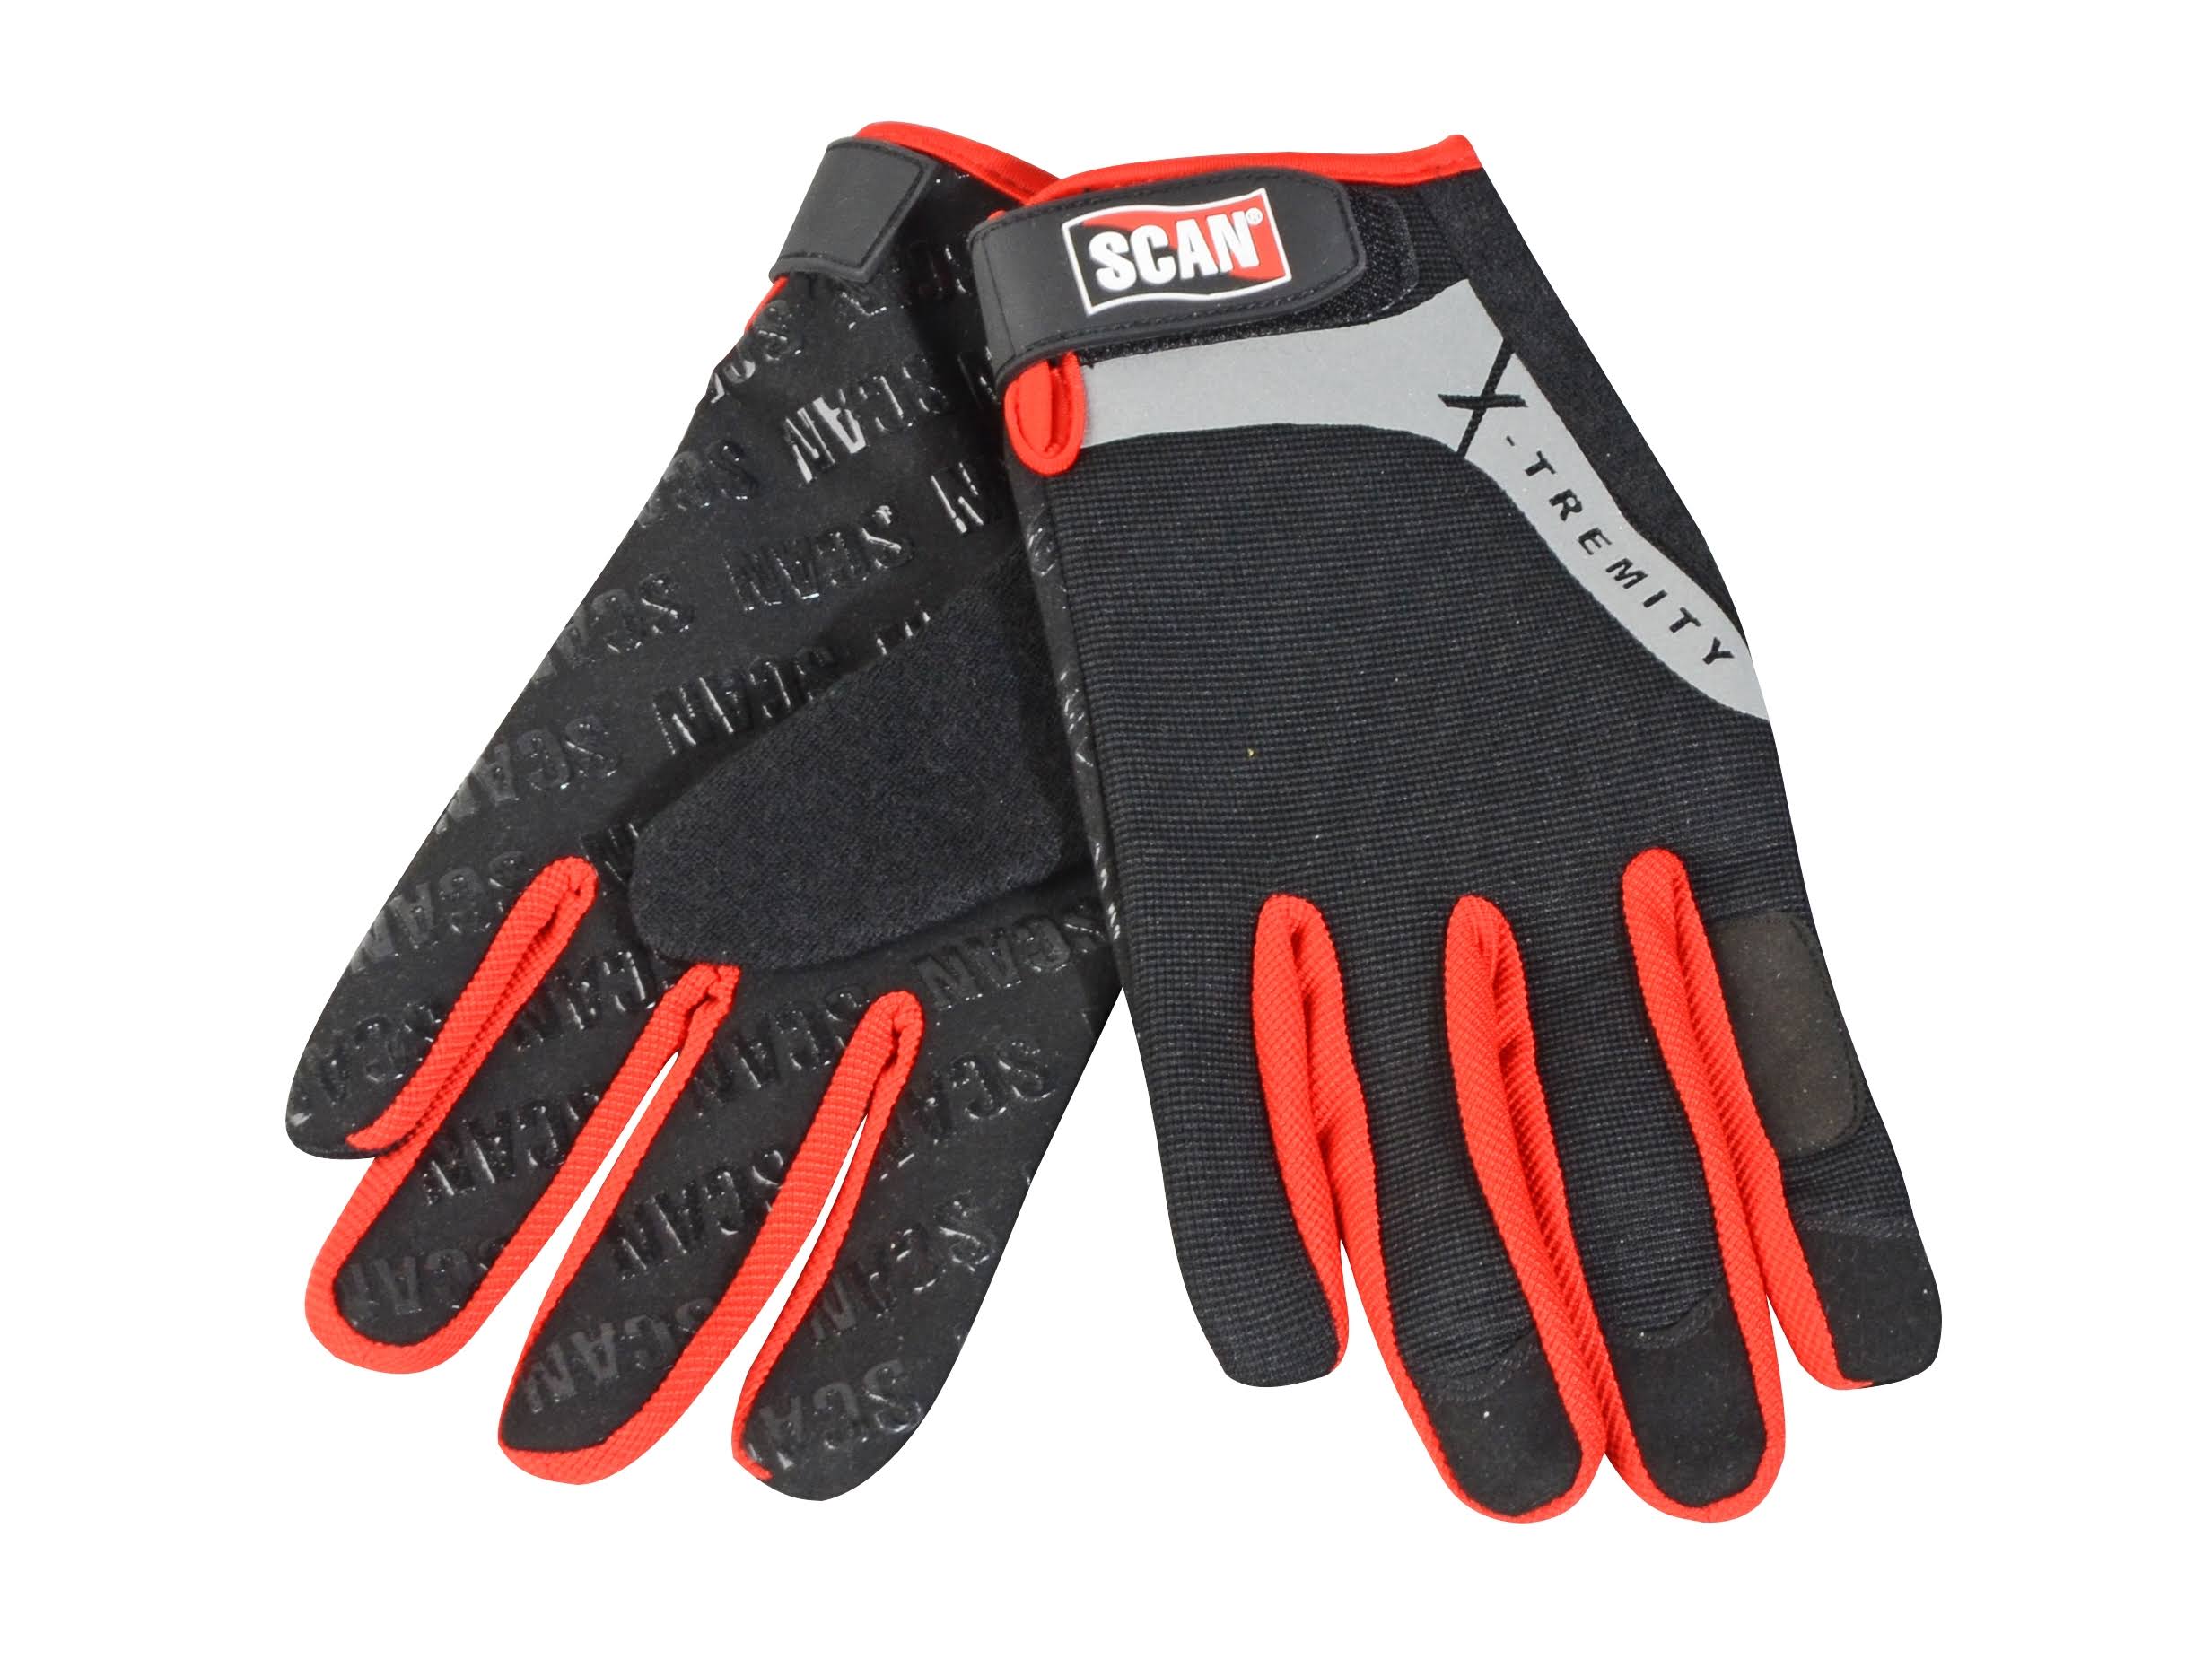 Scan Work Gloves with Touch Screen Function - Large (Size 9)